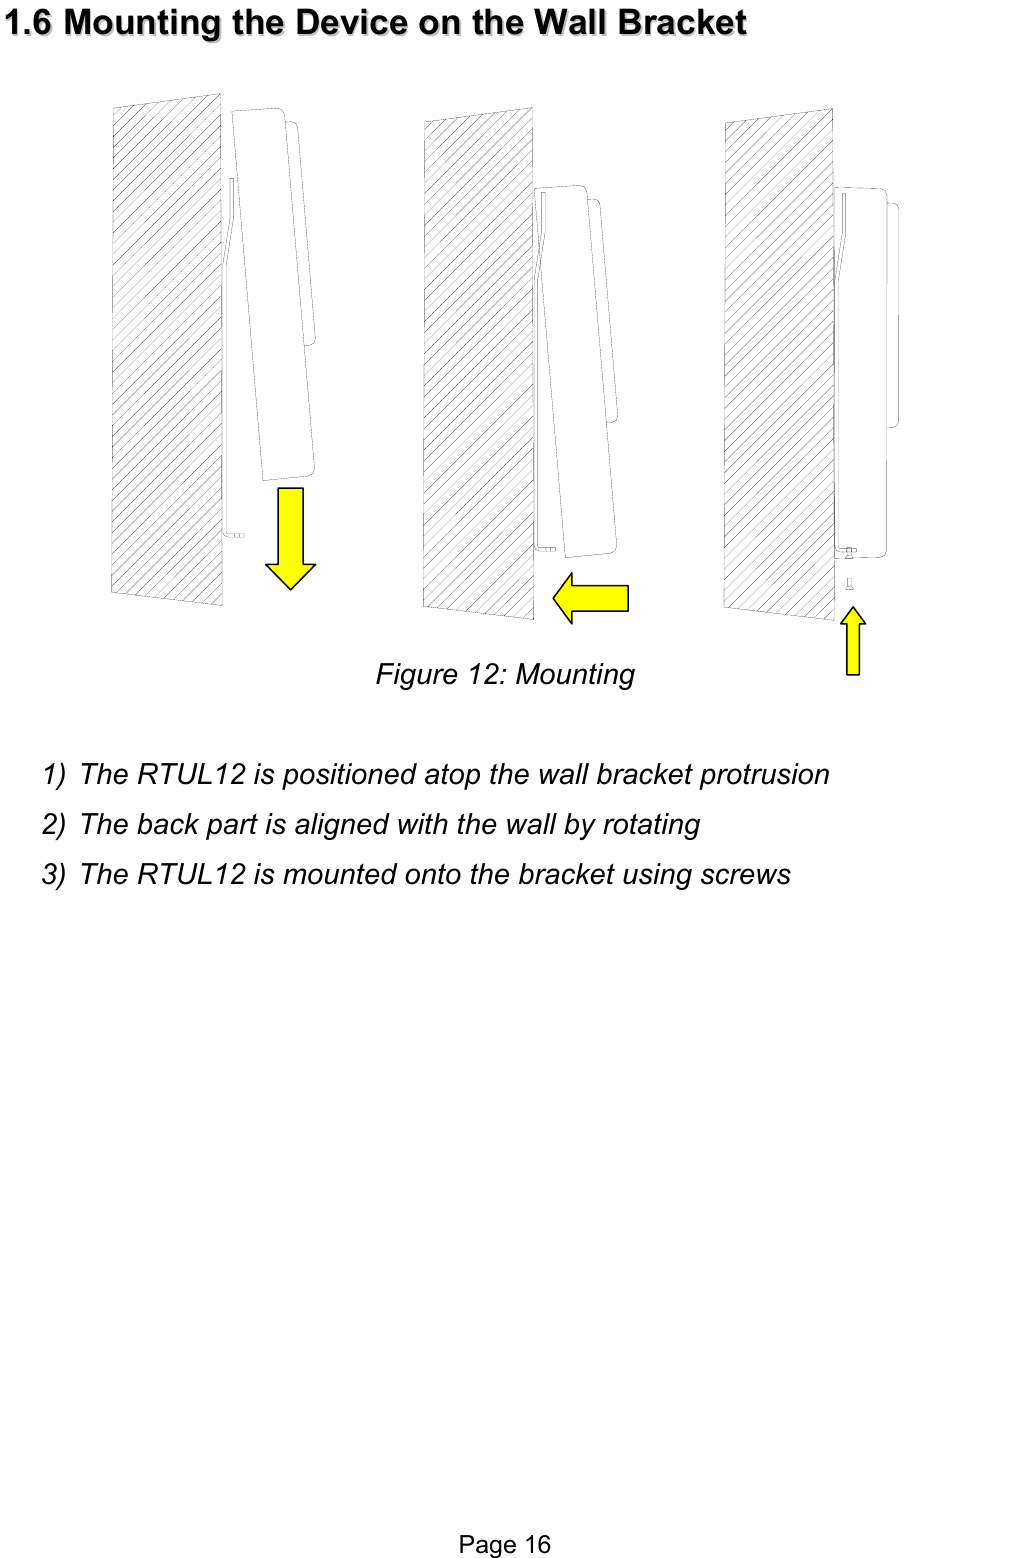  11..66  MMoouunnttiinngg  tthhee  DDeevviiccee  oonn  tthhee  WWaallll  BBrraacckkeett   Figure 12: Mounting   1)  The RTUL12 is positioned atop the wall bracket protrusion 2)  The back part is aligned with the wall by rotating 3)  The RTUL12 is mounted onto the bracket using screws   Page 16 